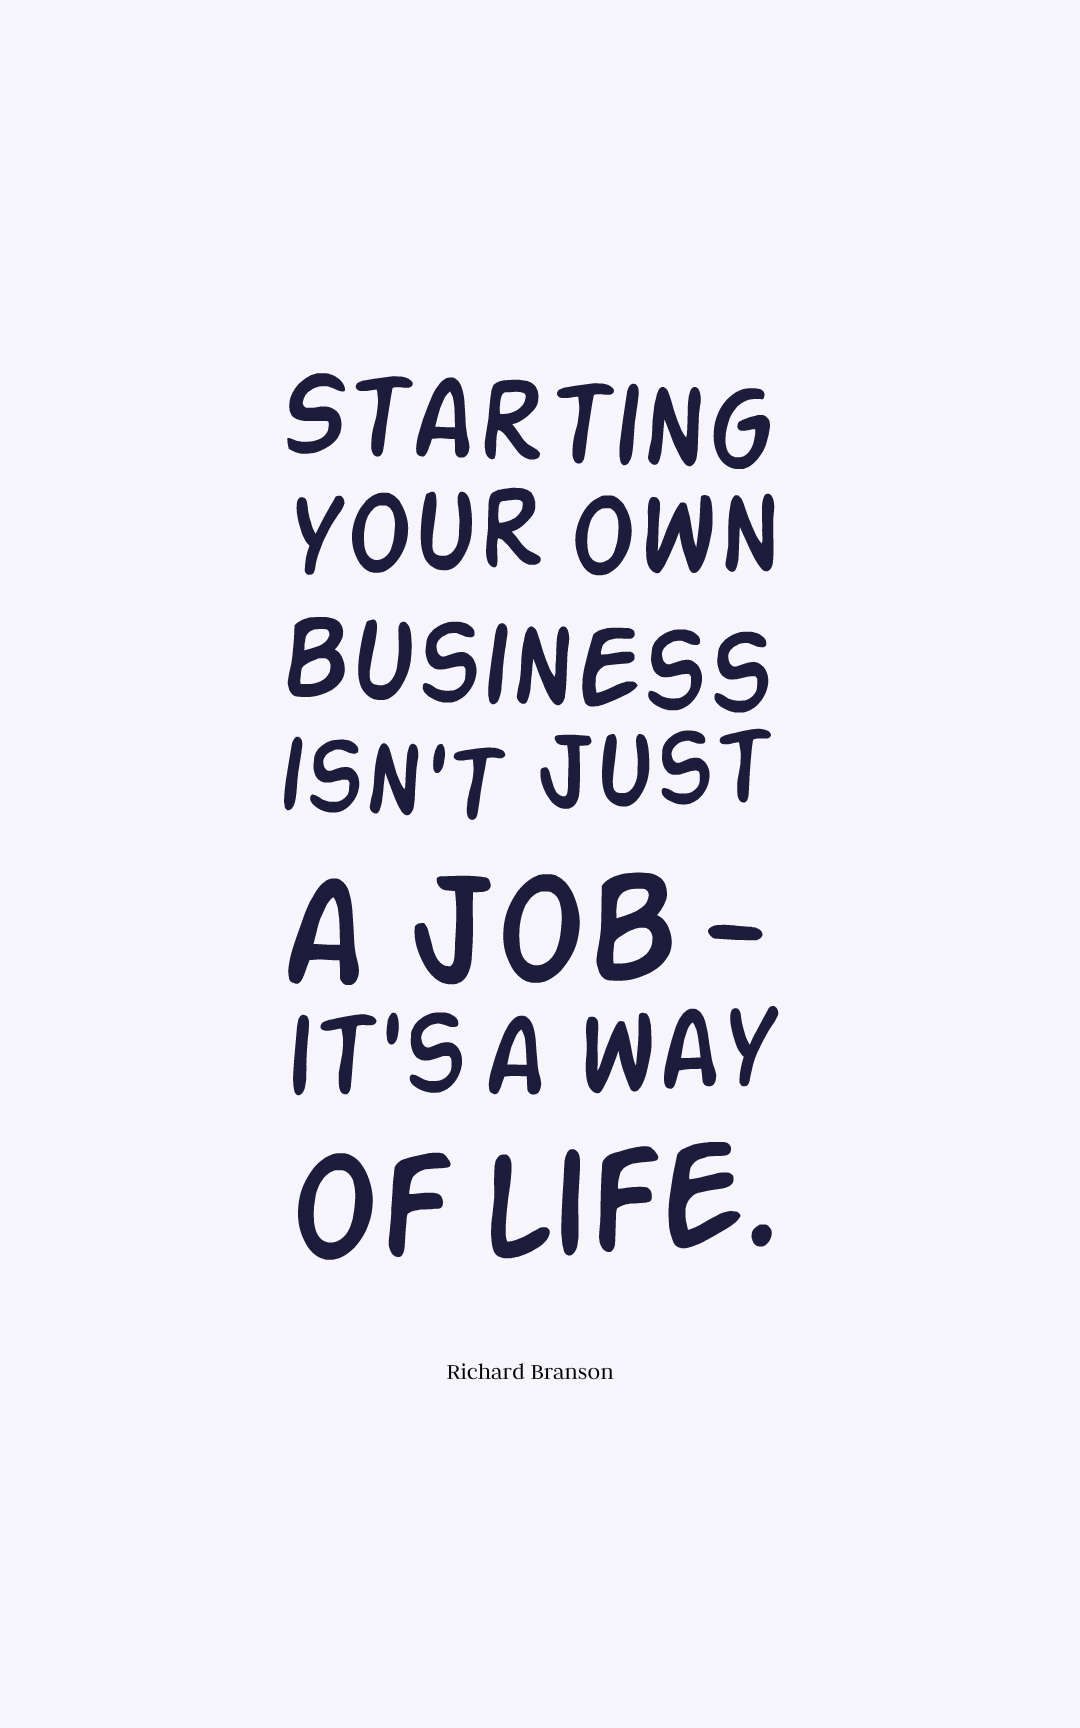 Starting your own business isn't just a job - it's a way of life.